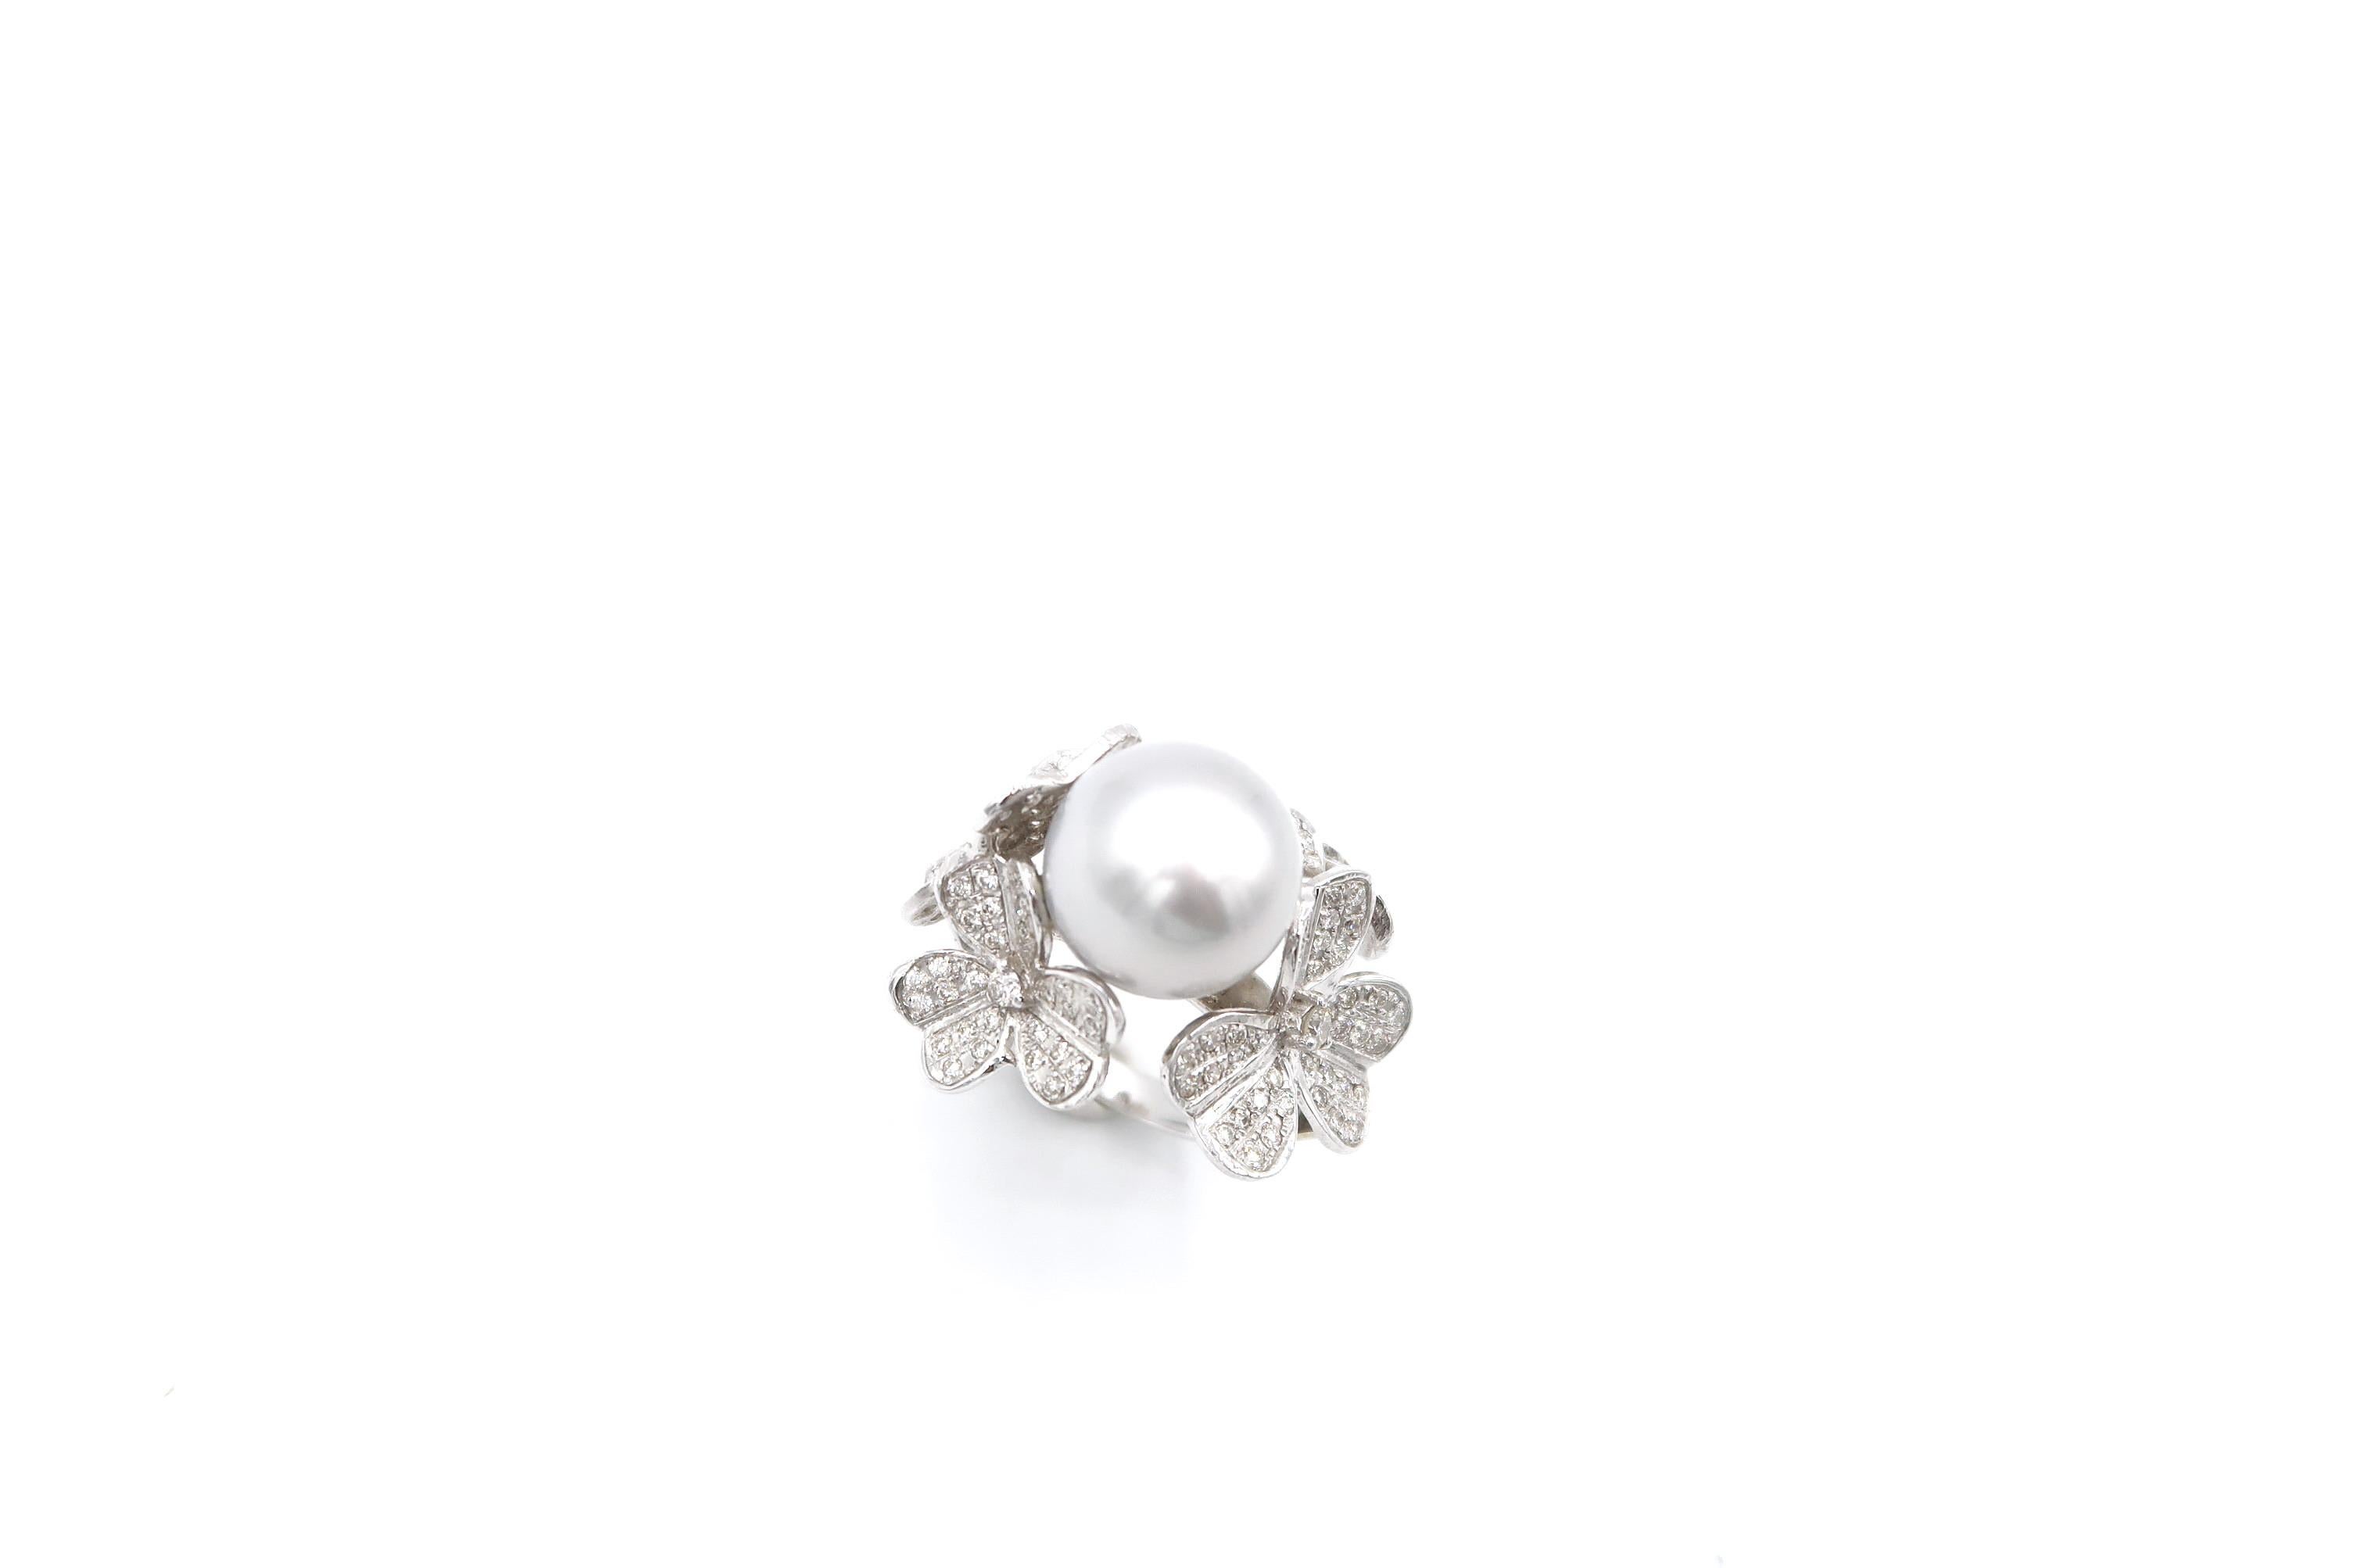 Diamond Pavé 3D Flower and Ribbon with Silver White South Sea Pearl Ring in 18K White Gold Setting

Ring size: 53, UK M, US 6 1/2
Let us know if you would like to have the ring resized. 

Diamond: 1.05ct.
Pearl: White South Sea Pearl 12.5mm.
Gold: